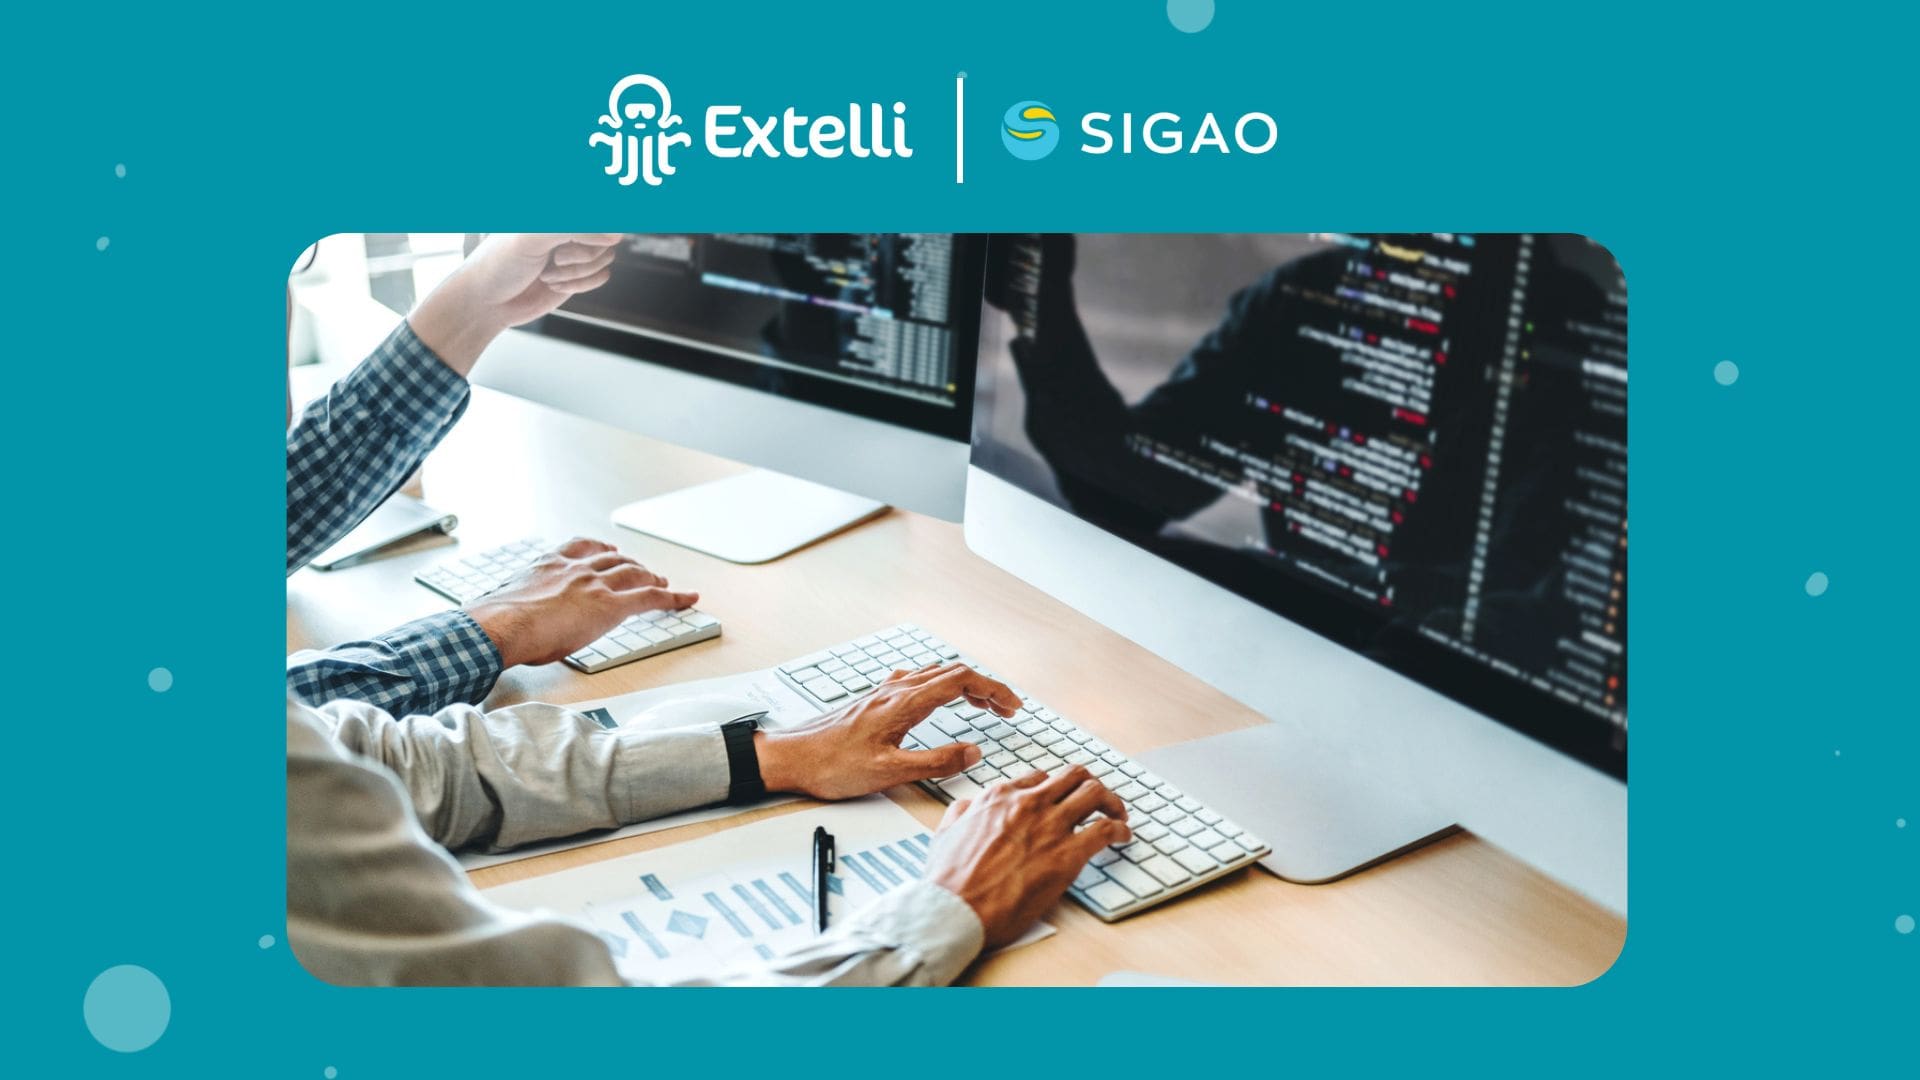 Agile Workflows and Efficiency with Sigao Studios